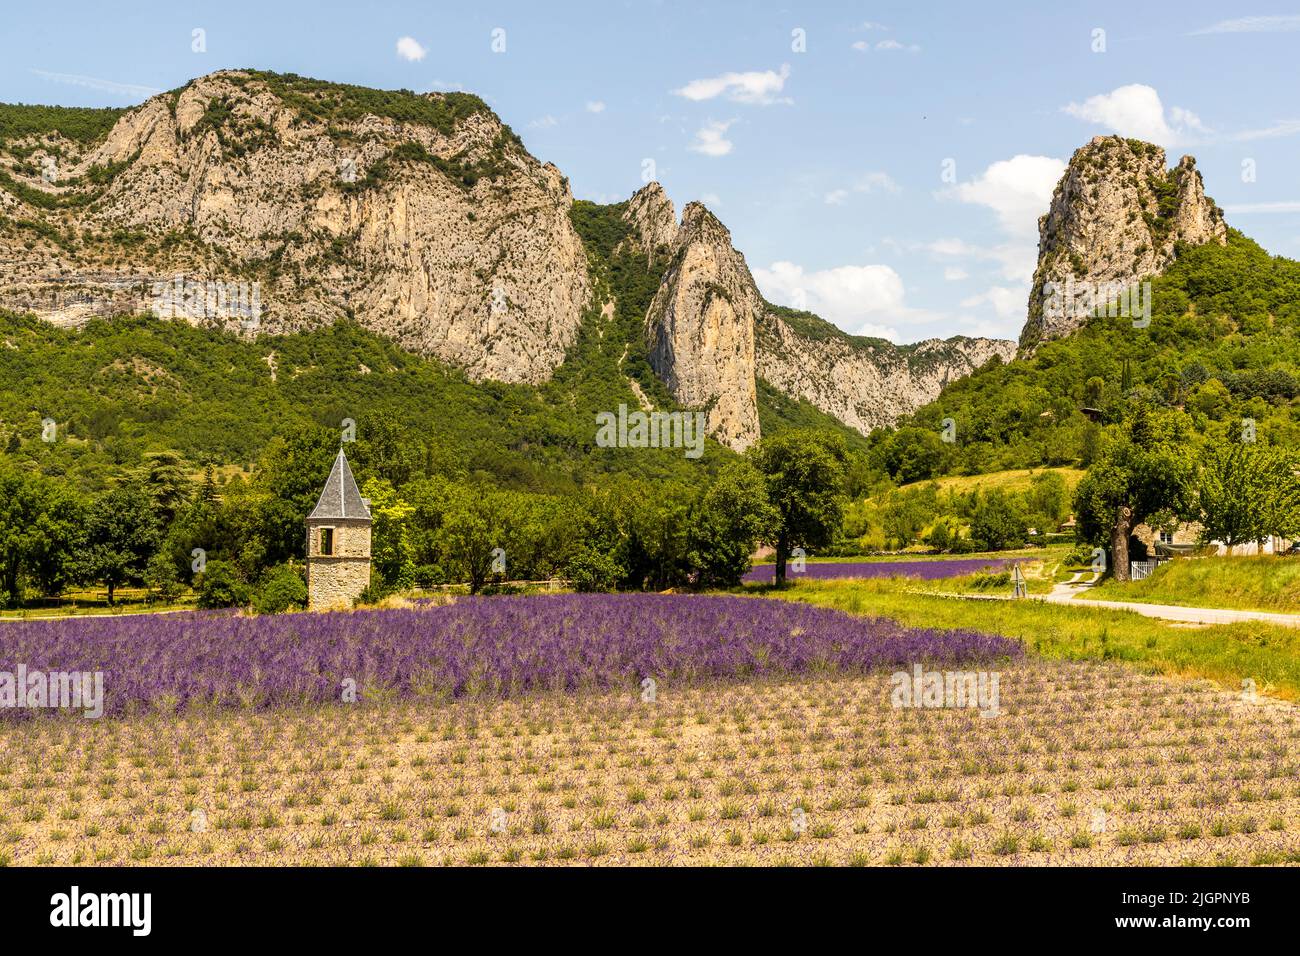 Lavender field with young plants in front of a tower and the foothills of the Vercors mountains in France, Drome valley Stock Photo